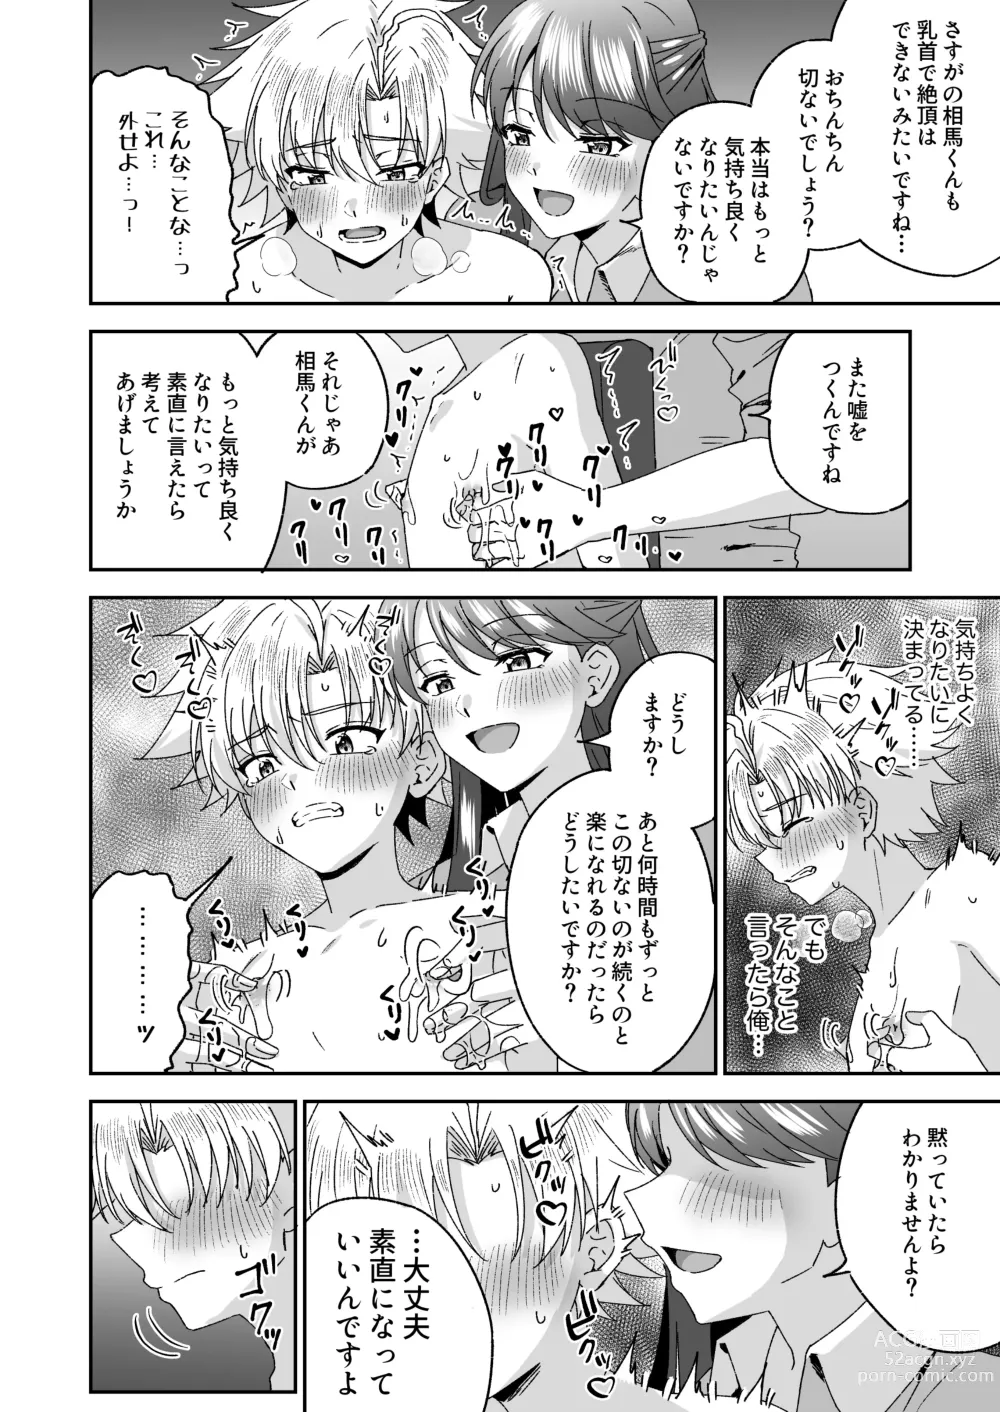 Page 25 of doujinshi A story about a delinquent boy who gets chastity belt ejaculation control reverse anal sex by a female teacher who is a nymphomaniac